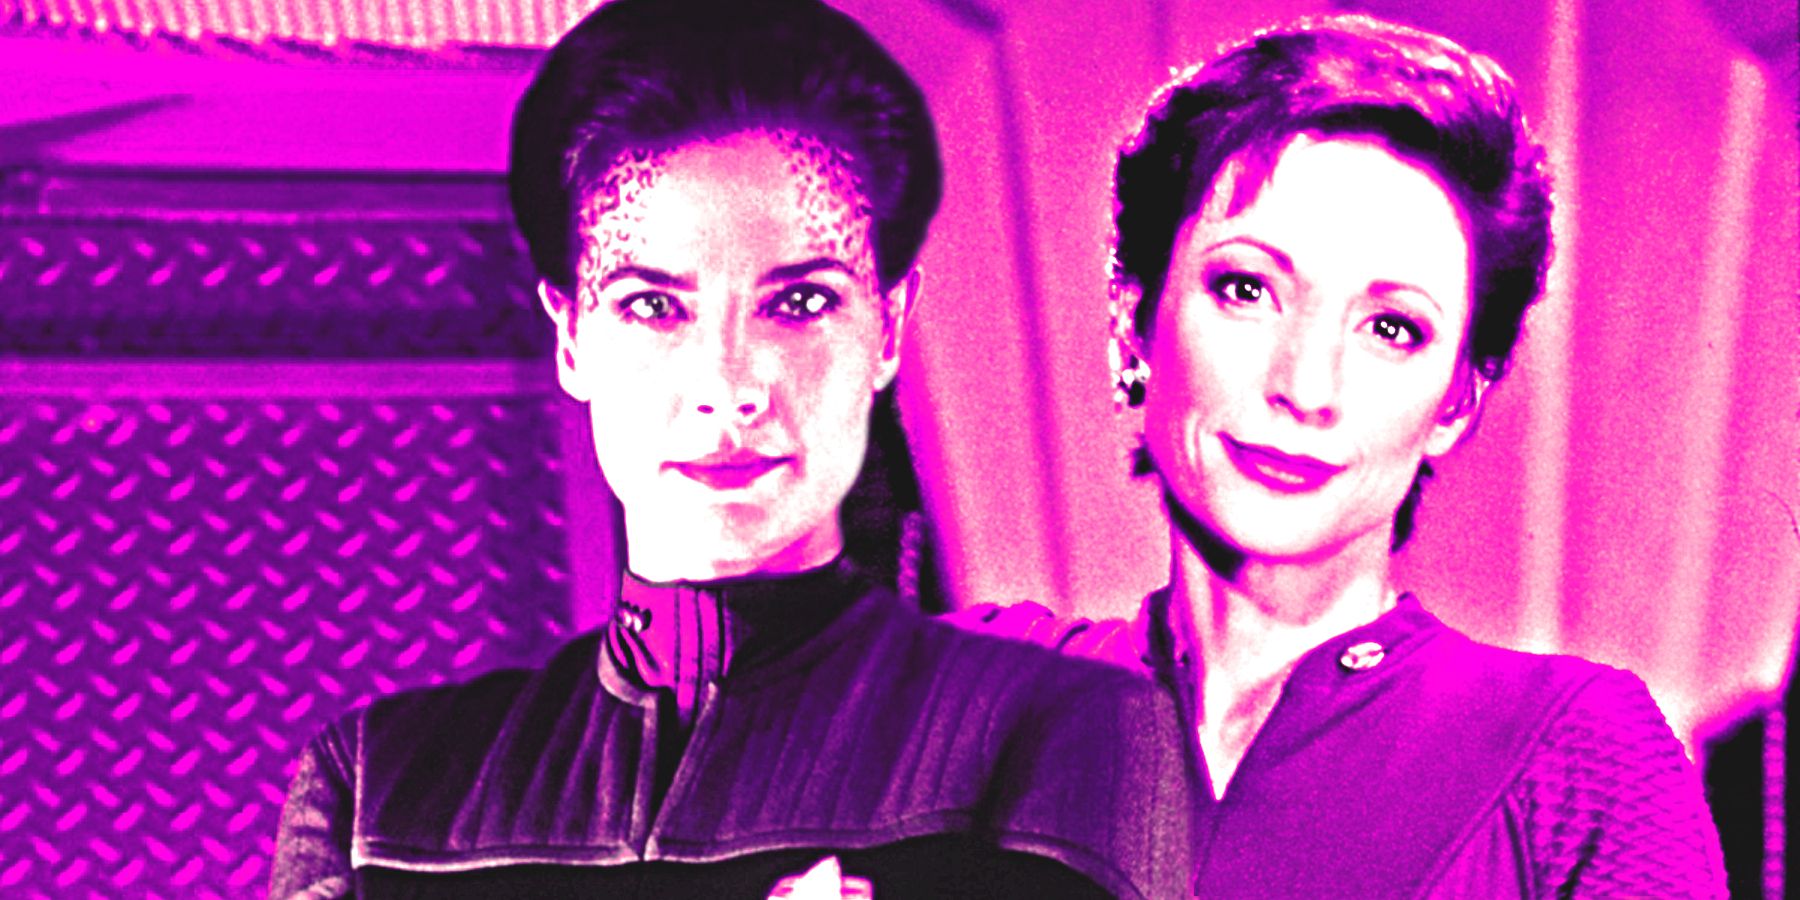 Dax and Kira from DS9